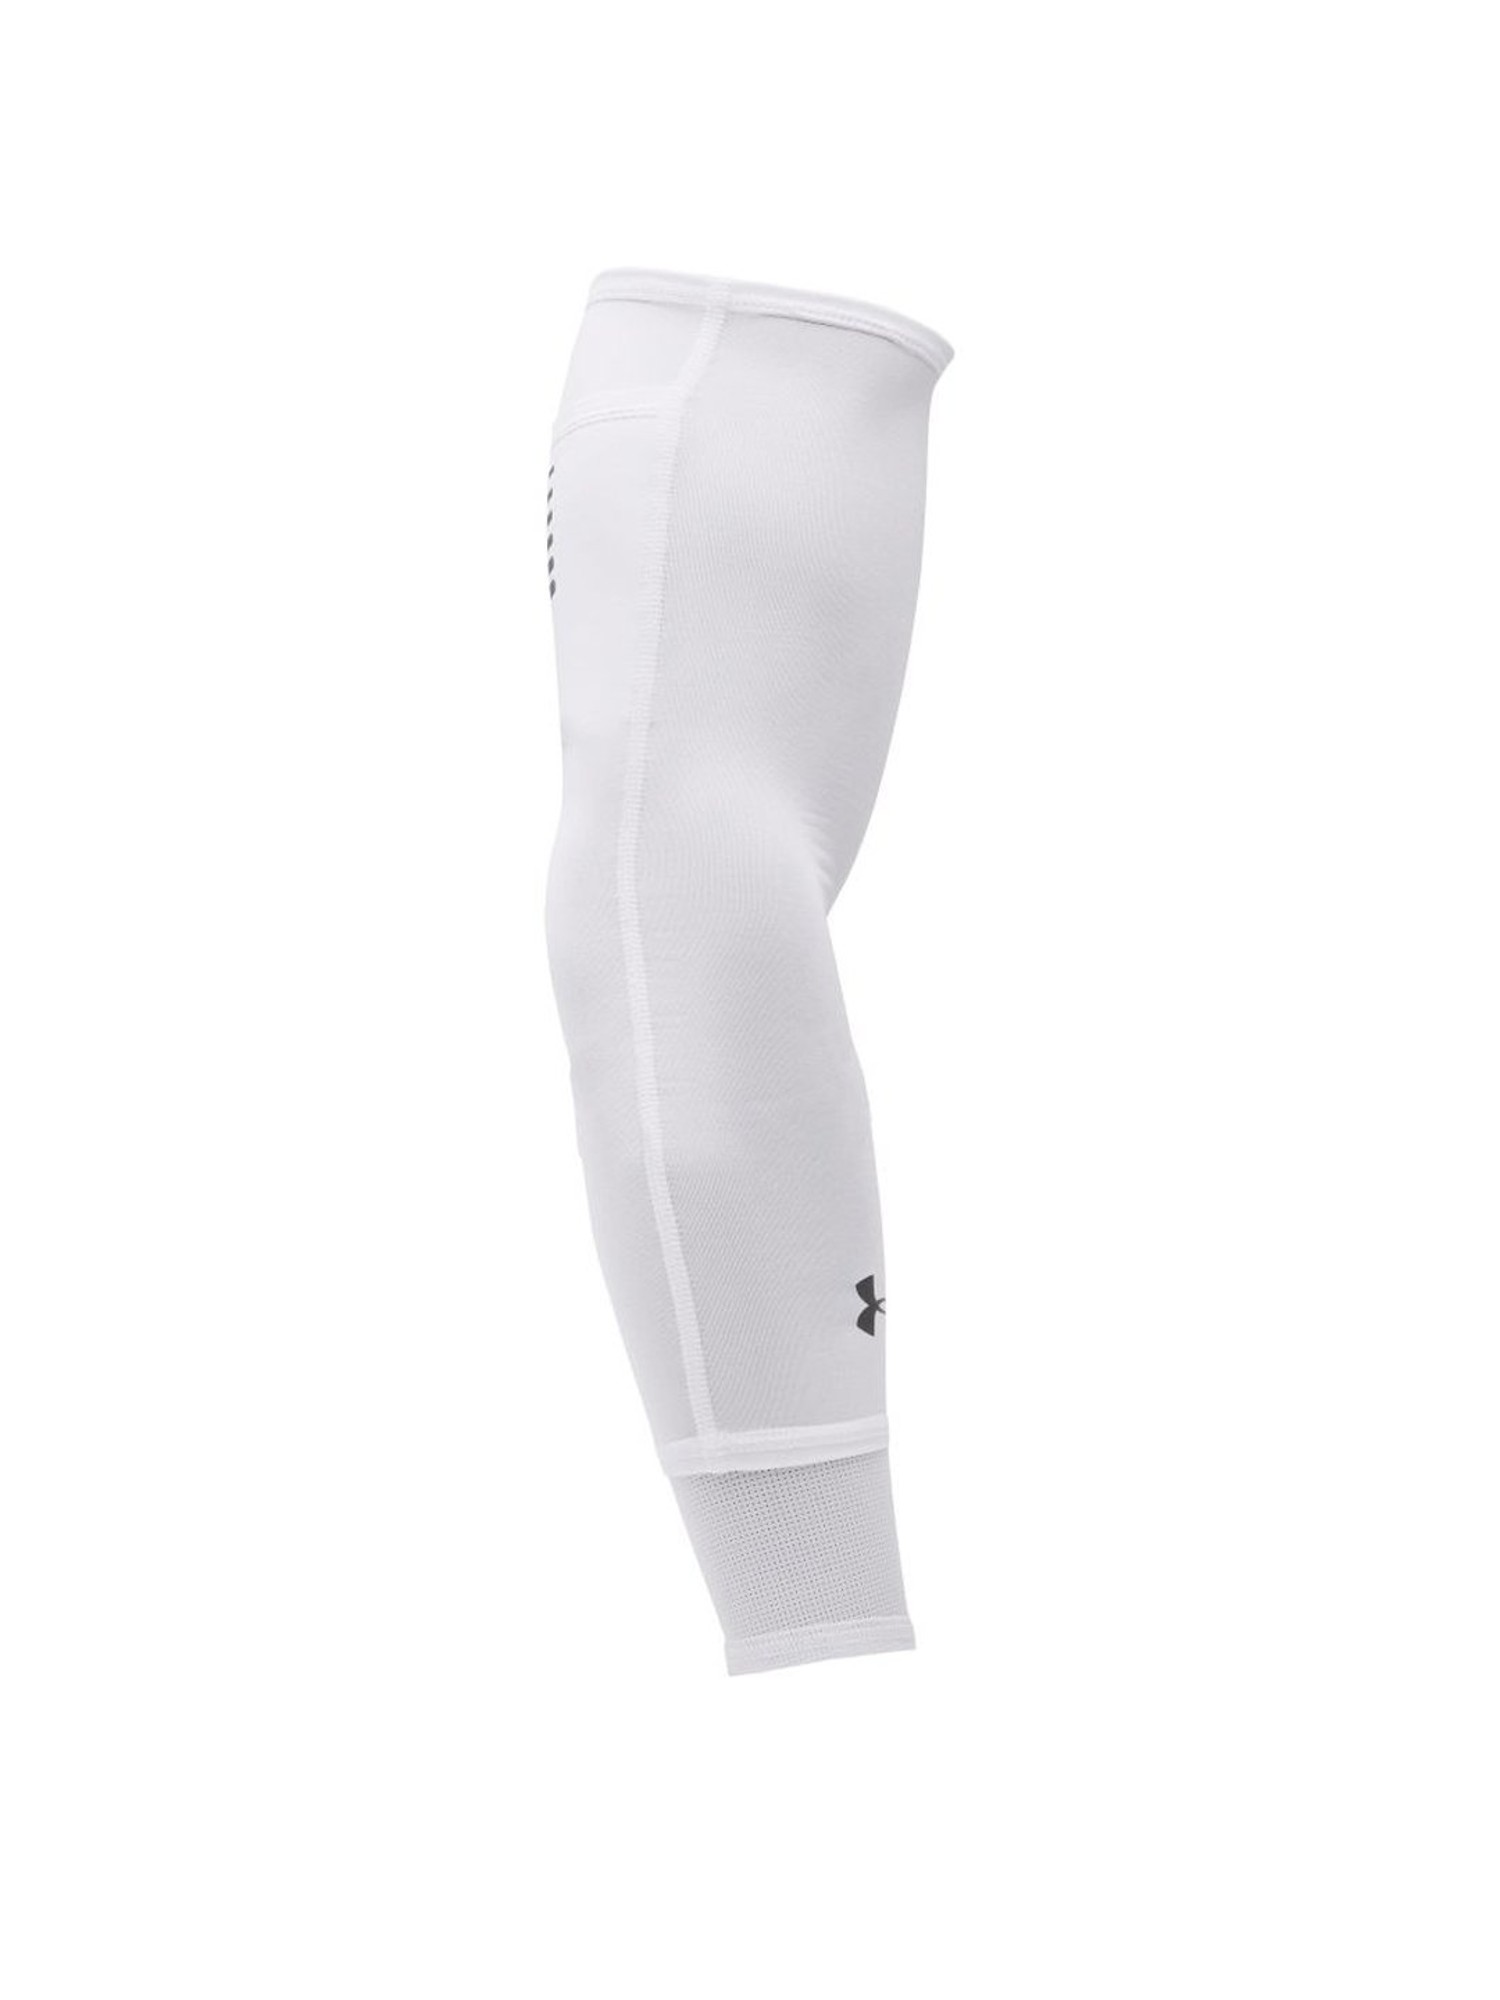 Buy Under Armour White Arm Sleeves - Large/Extra Large Online At